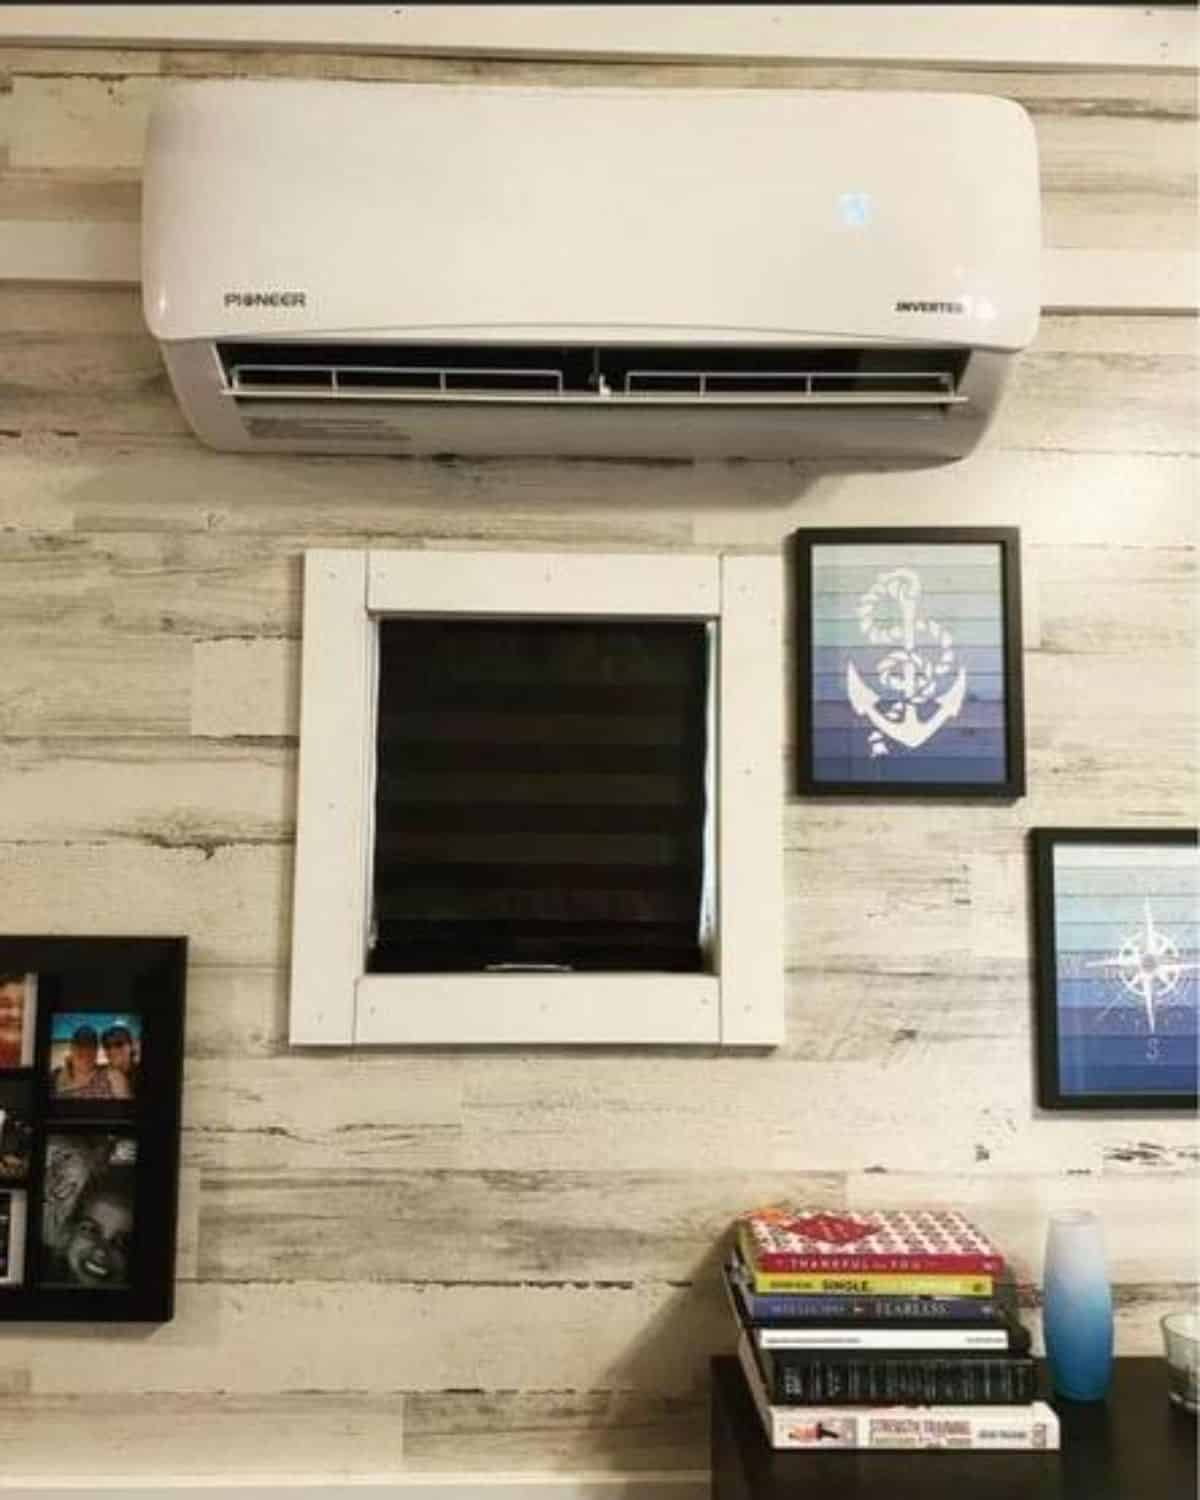 Air condition unit is also included into the deal